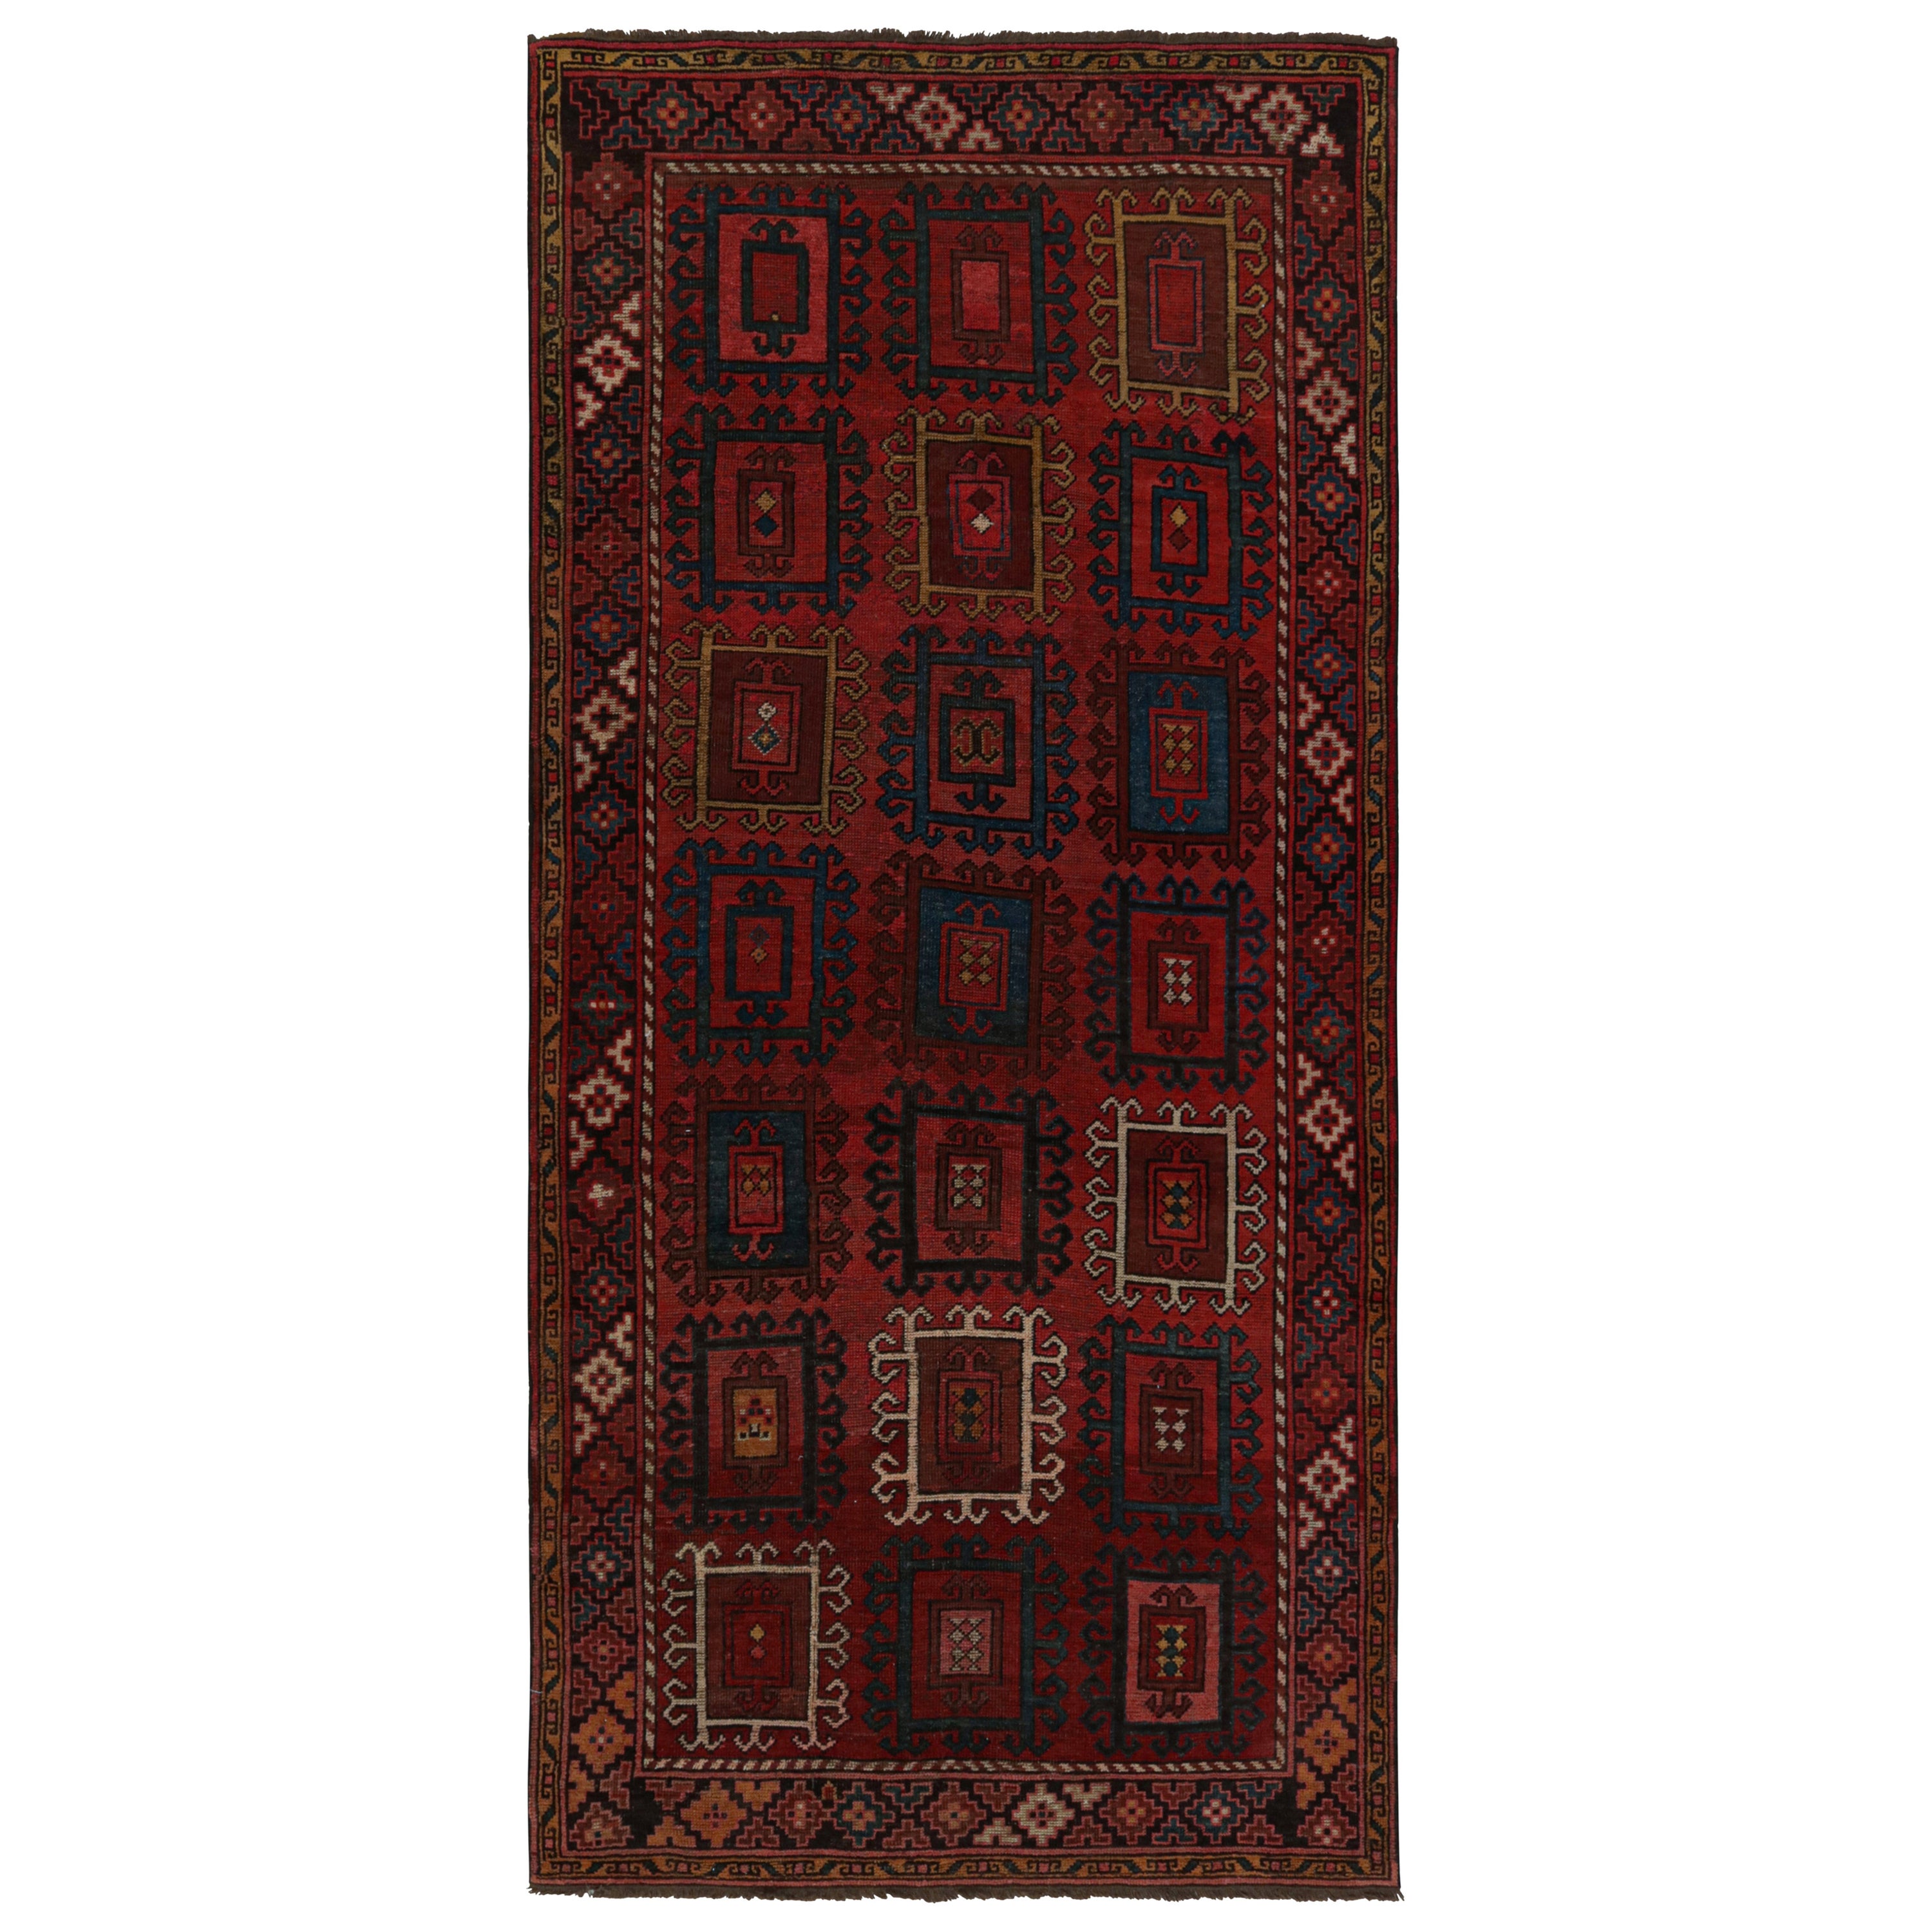 Vintage Turkish Rug, with All-Over Geometric Patterns, from Rug & Kilim For Sale